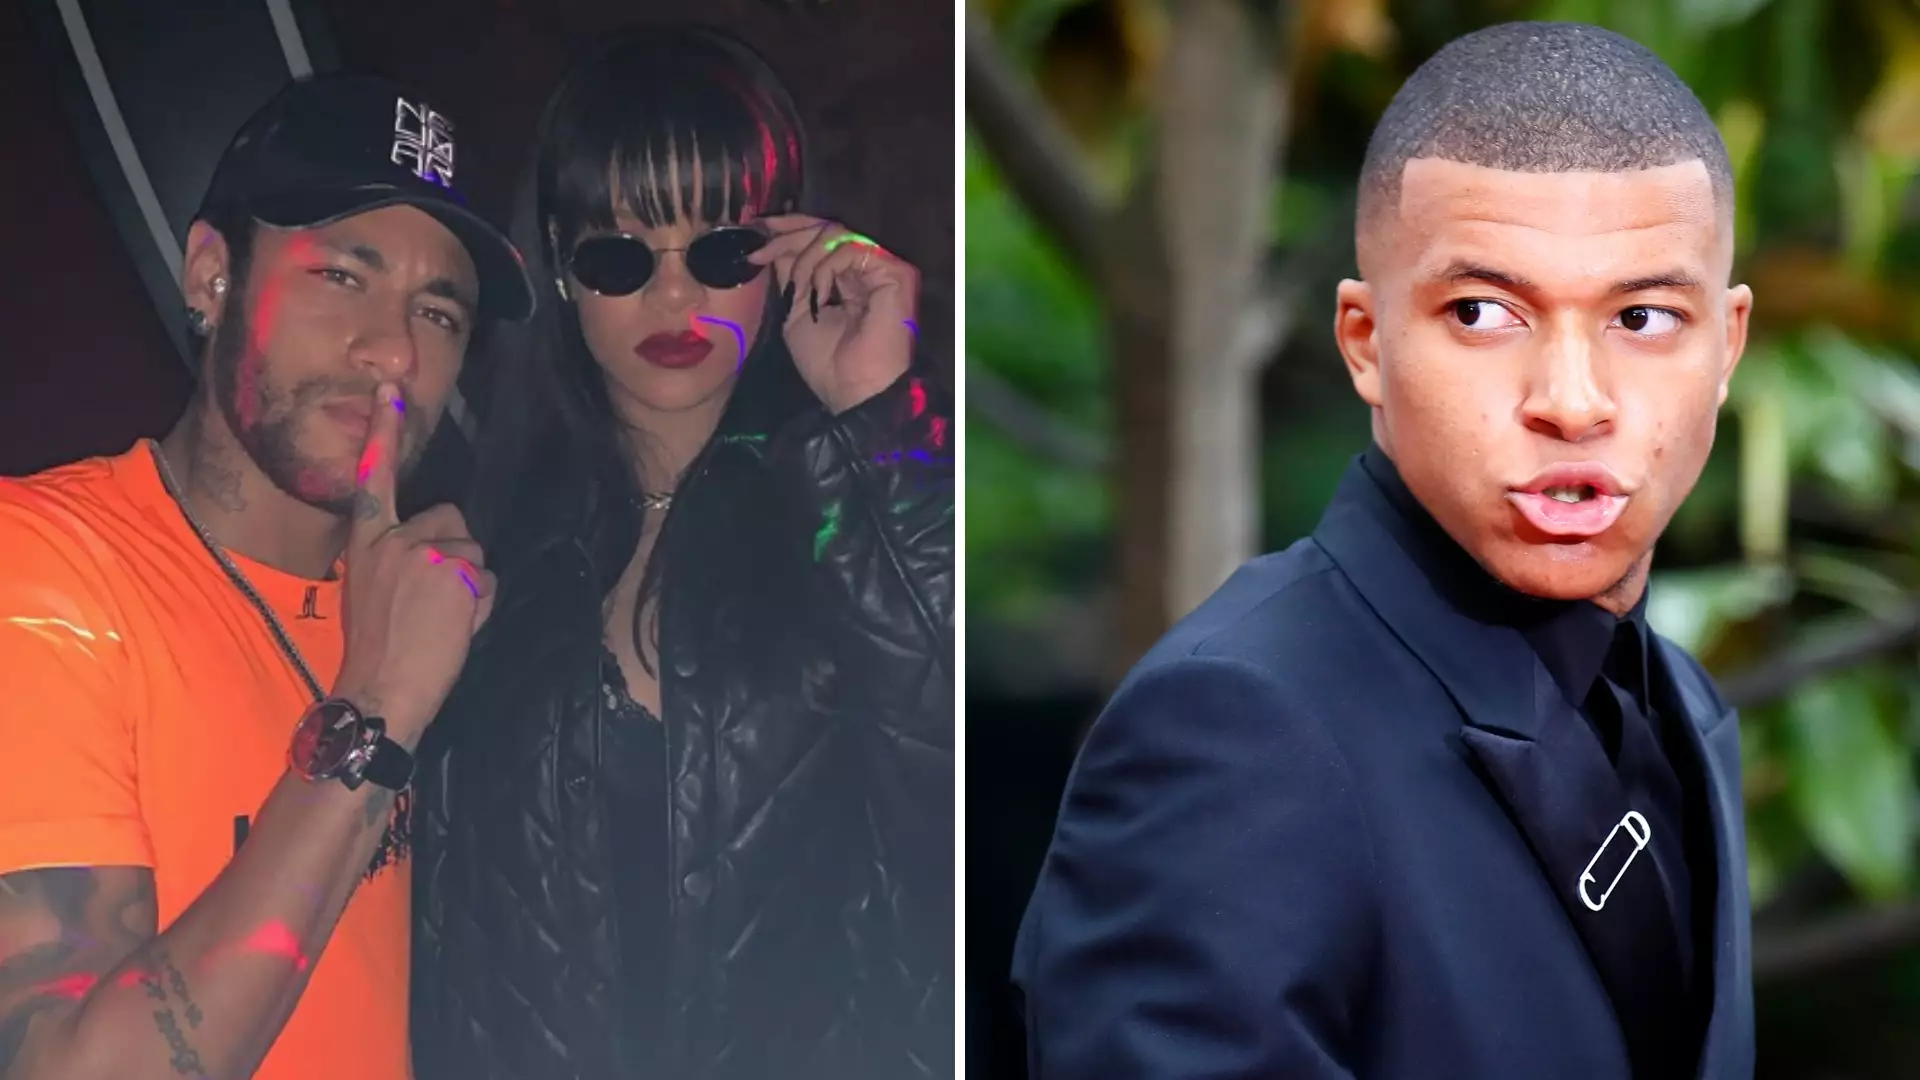 Neymar Snubs Kylian Mbappé's Player Of The Year Award Win To Party With Rihanna